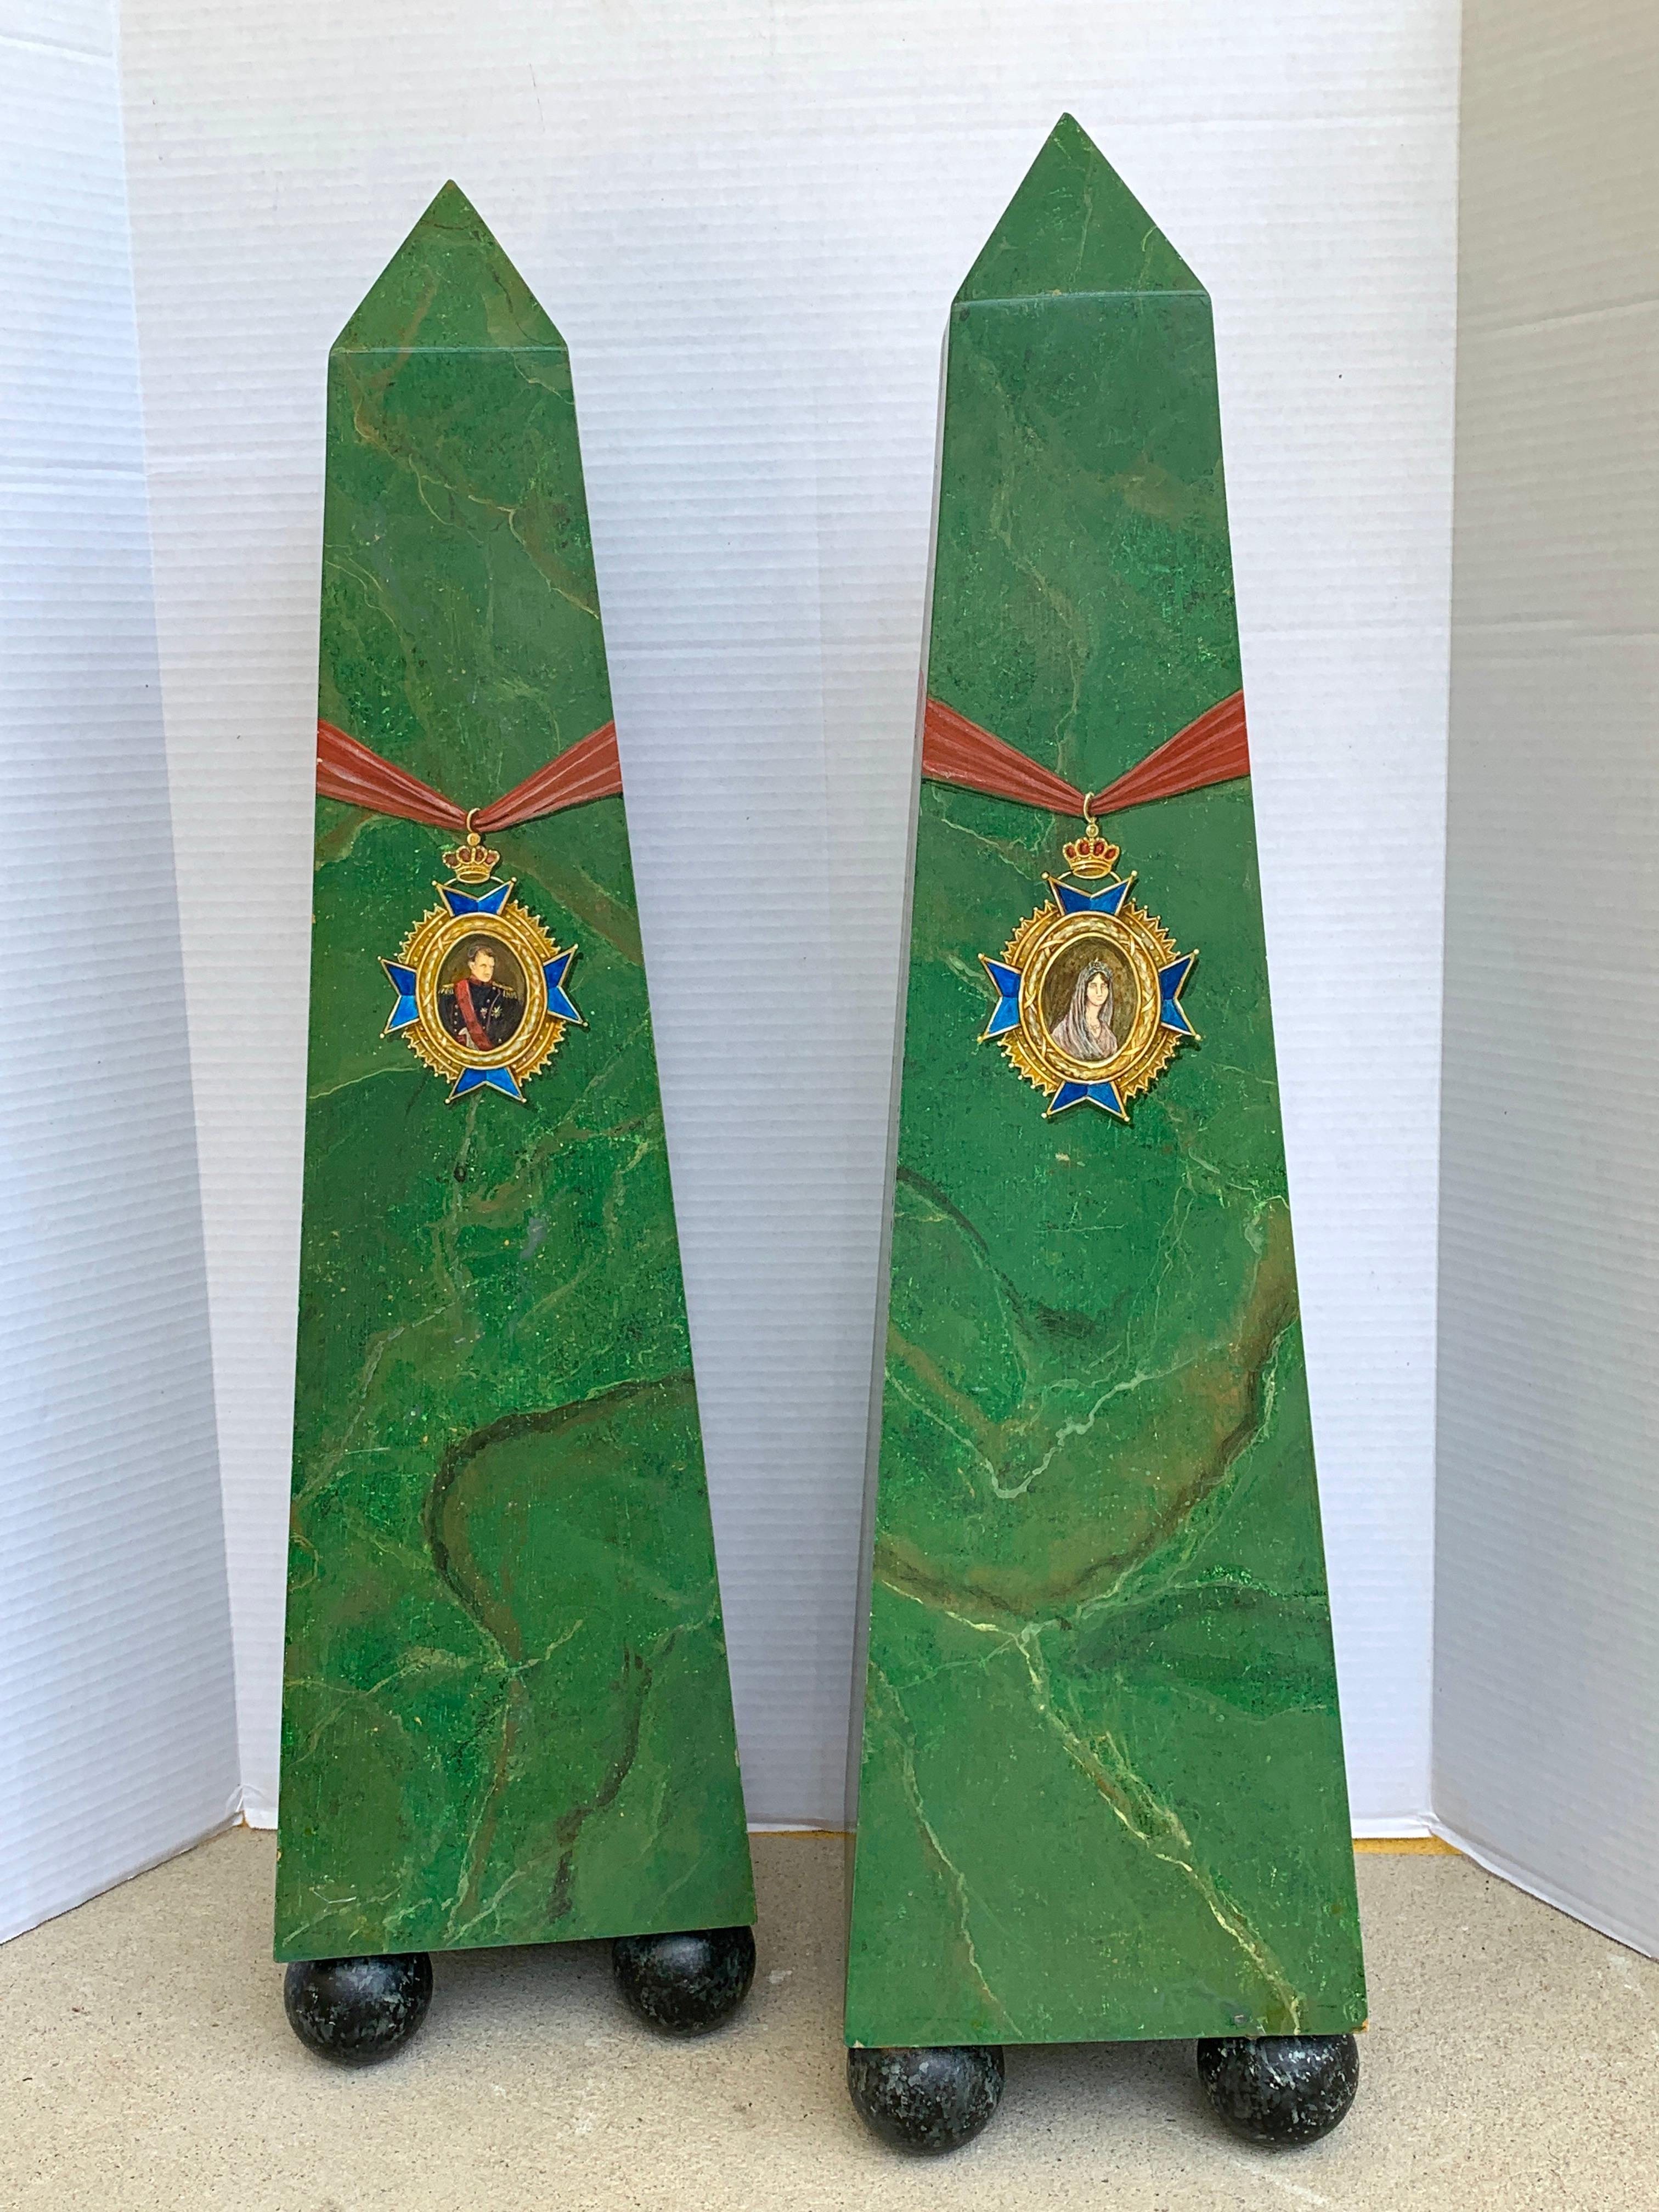 Large pair of faux malachite neoclassical portrait obelisks, Each one raised on four ball feet, with portrait medallions on one side, and bows on the other.
Measures: Each obelisk is 8